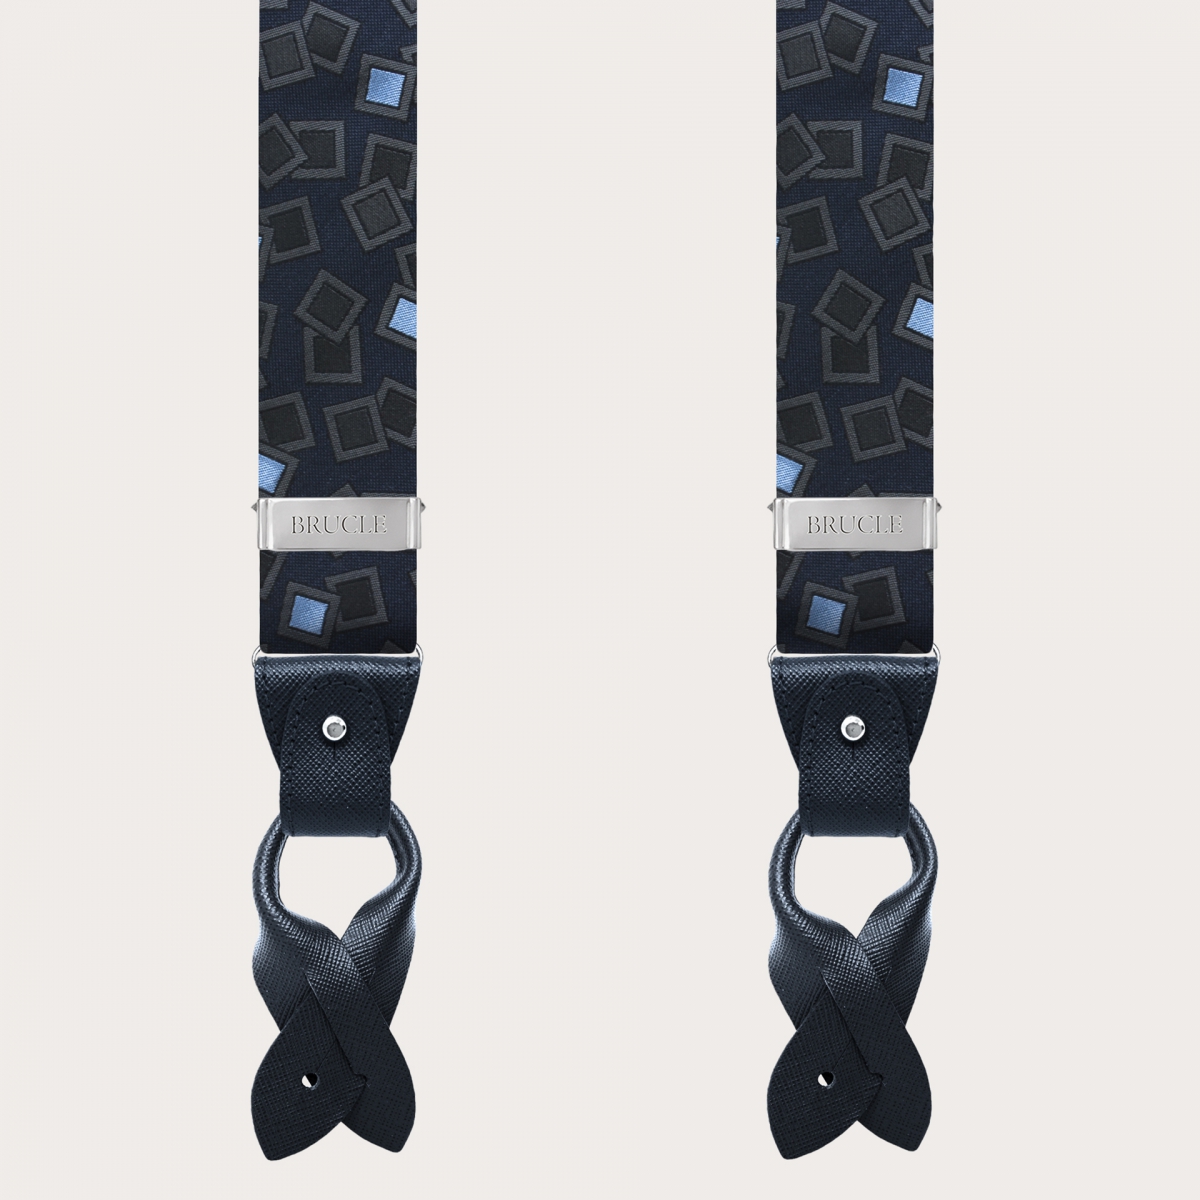 BRUCLE Suspenders in jacquard silk, navy blue with anthracite and light blue pattern